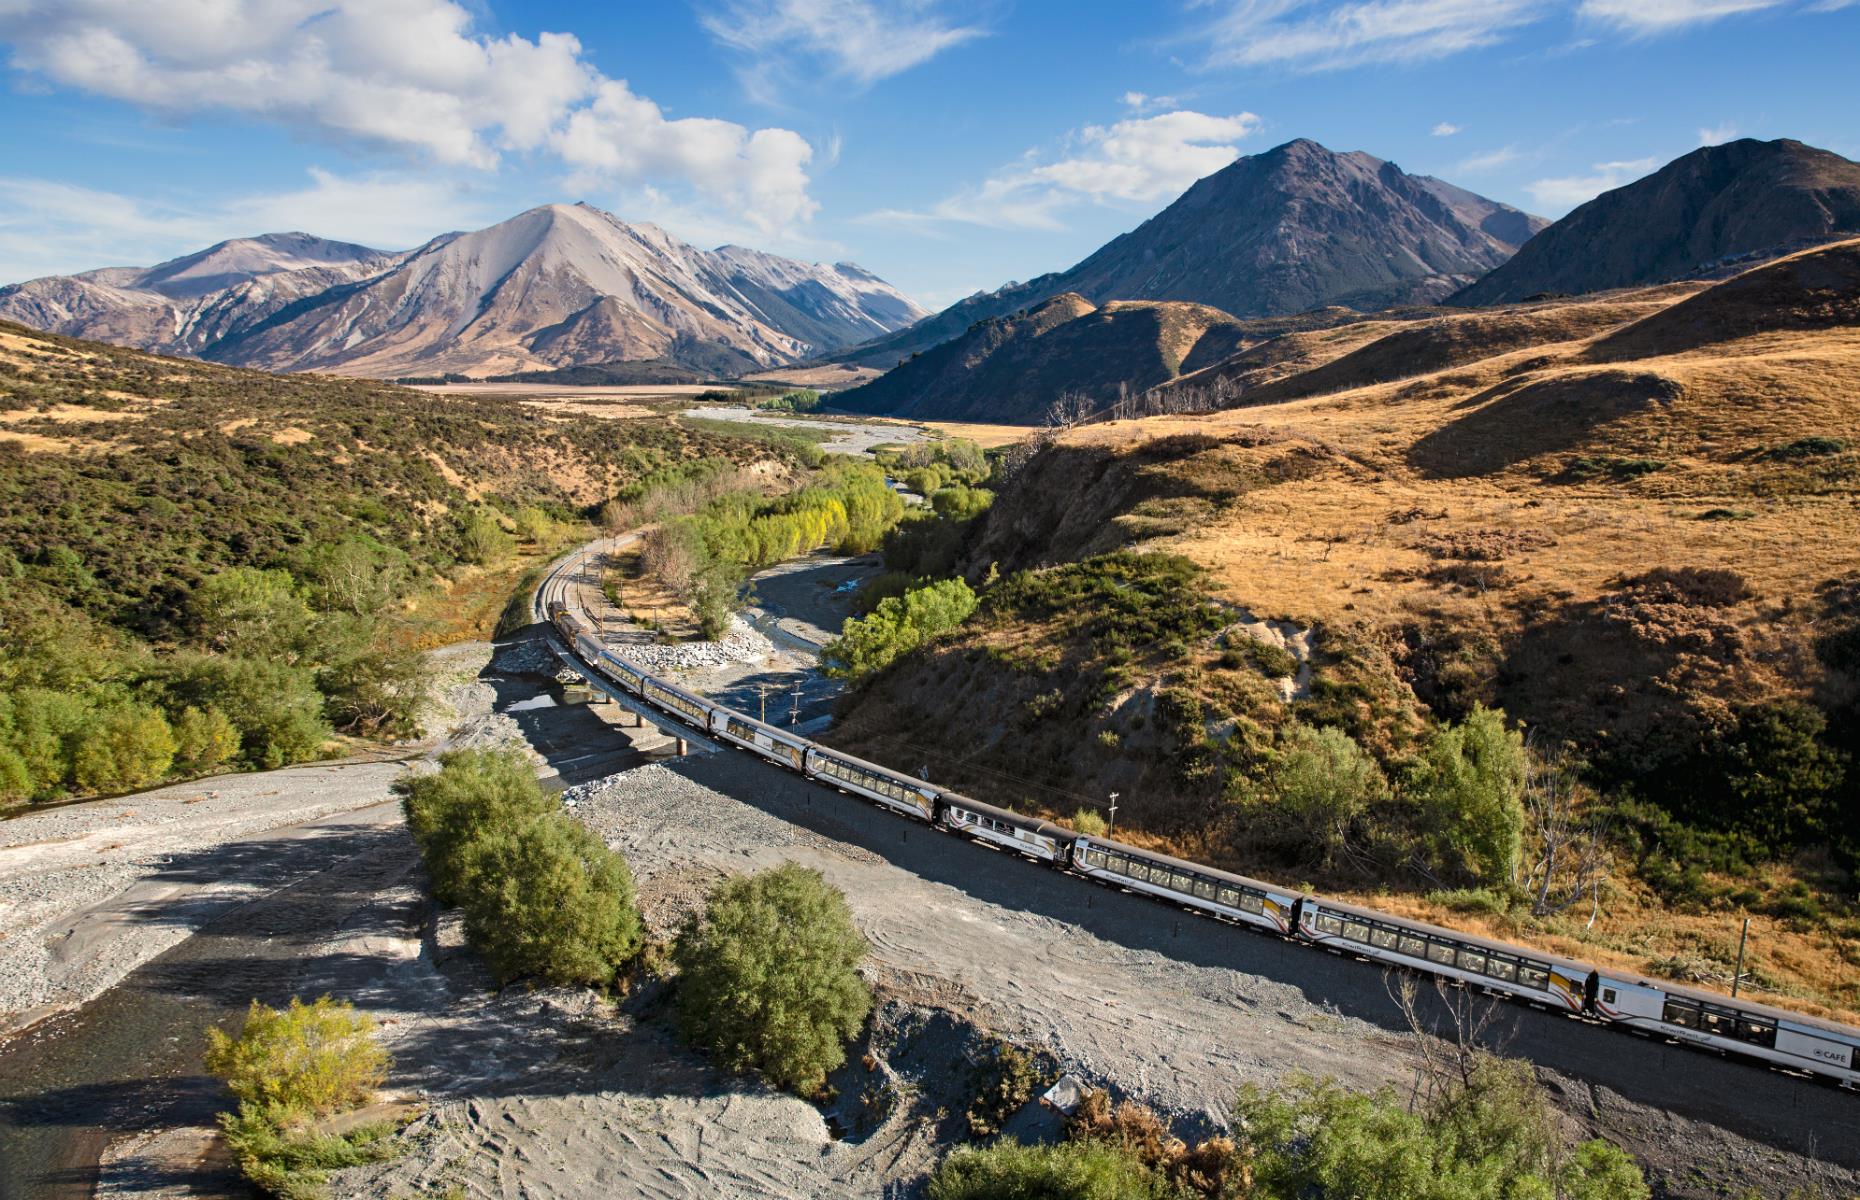 <p>The stupendous scenery of the <a href="https://www.greatjourneysofnz.co.nz/tranzalpine/">TranzAlpine rail route</a> between Christchurch and Greymouth takes in the Canterbury Plains, Southern Alps (jump off to explore Arthur's Pass), lush lake valleys and native beech forests. The train goes through short tunnels and crosses dramatic viaducts on its five-hour journey. Currently, face masks are required, even in the open-air viewing carriage.</p>  <p><strong><a href="https://www.loveexploring.com/galleries/64341/the-worlds-most-luxurious-train-journeys-you-wont-want-to-get-off">These are the world's most luxurious train journeys</a></strong></p>